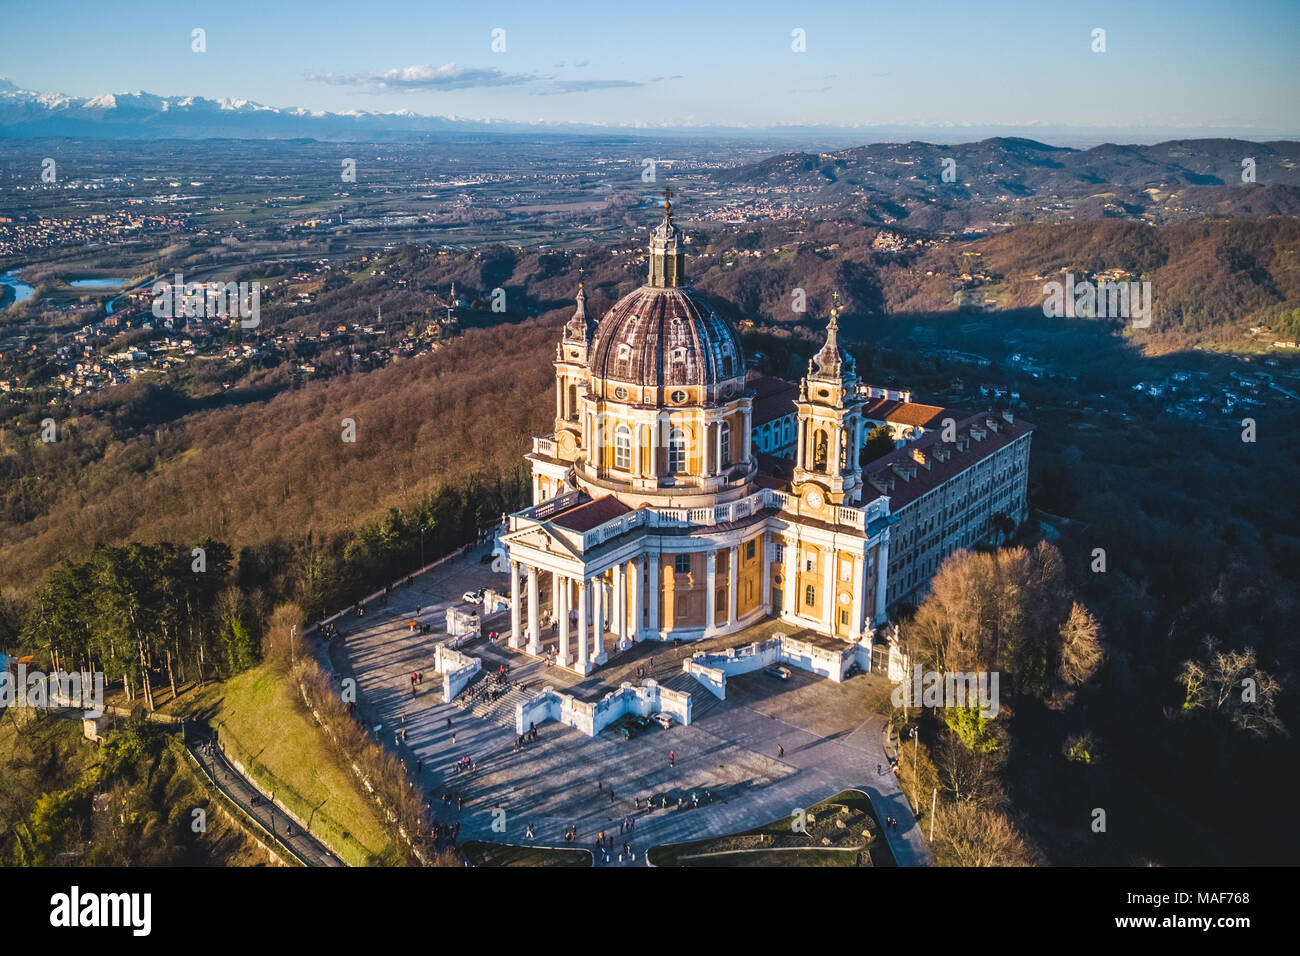 Aerial pictures of the Basilica di Superga.The Basilica of Superga is a  church in the vicinity of Turin. Photo: Alessandro Bosio/Alamy Stock Photo  - Alamy